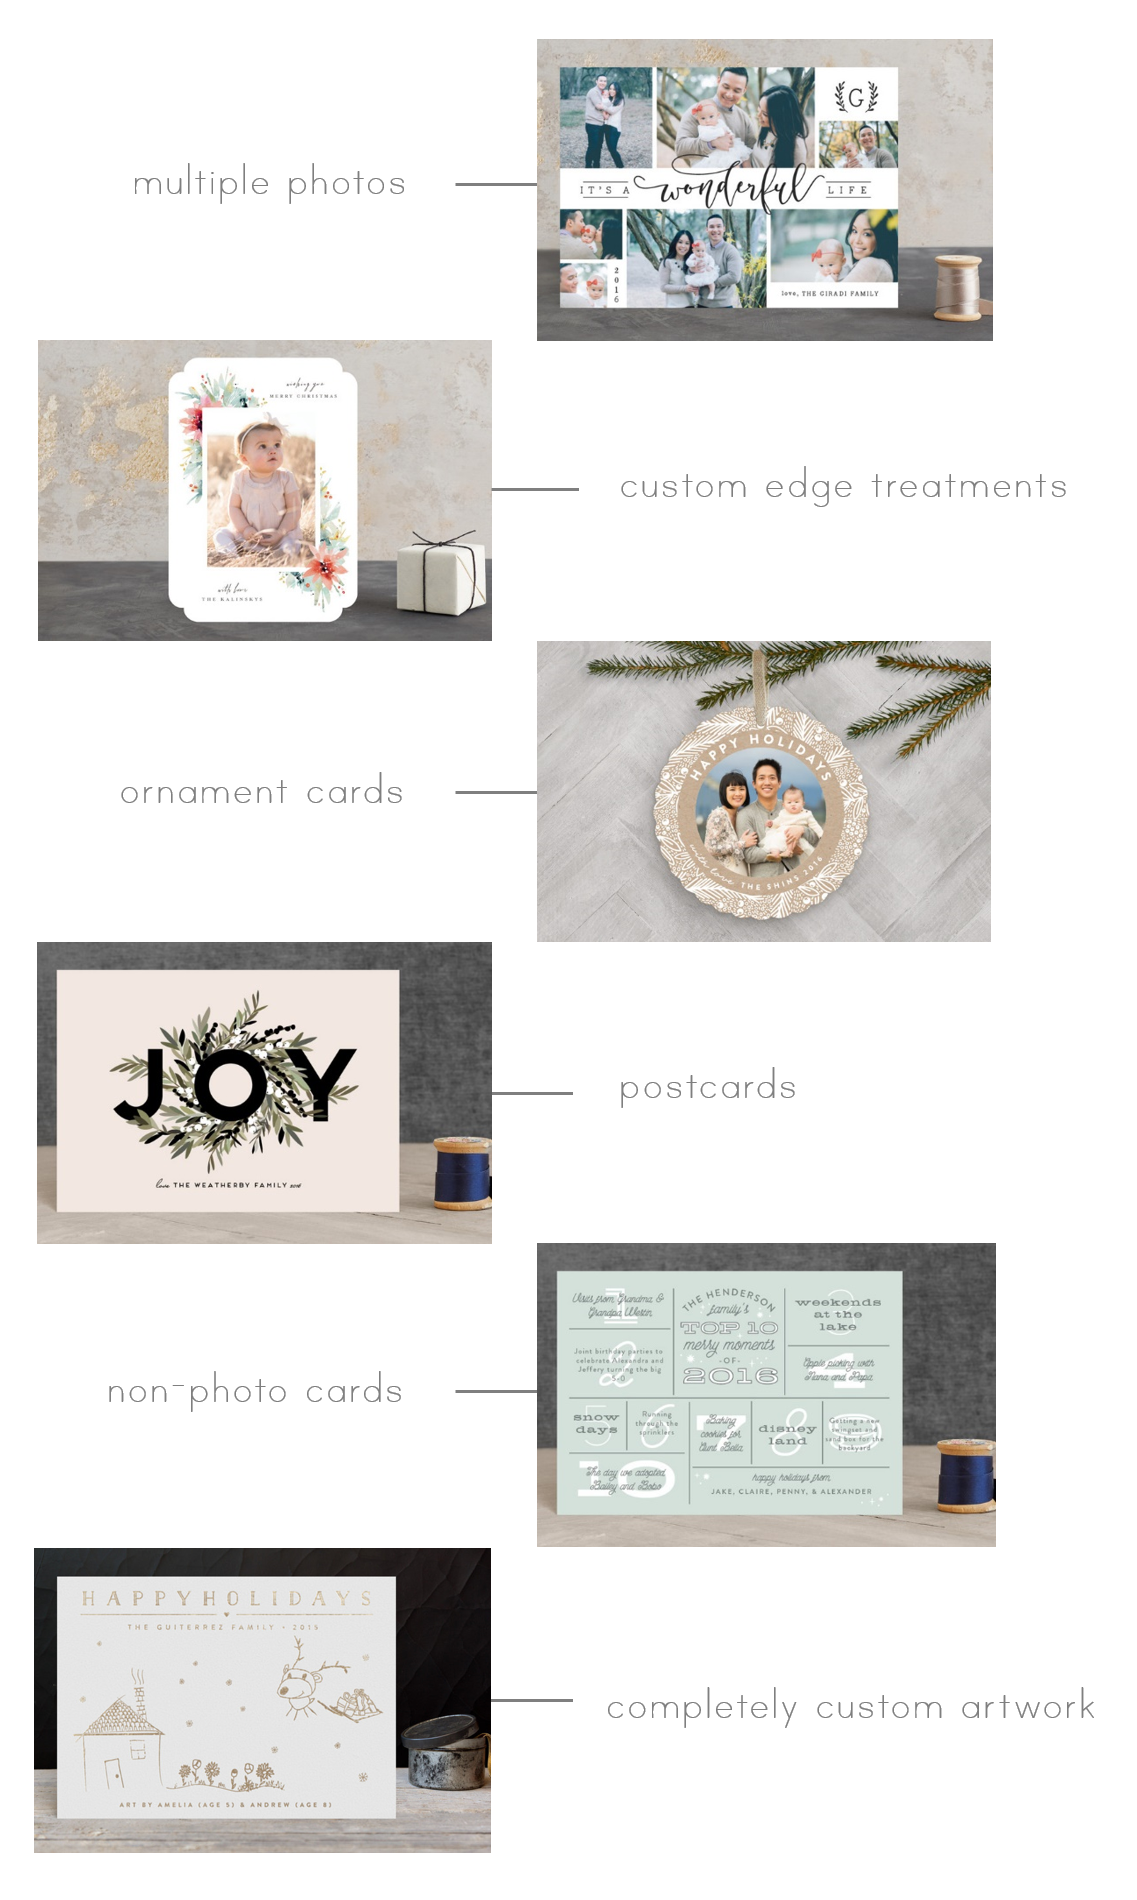 Minted is hands-down THE best place to order holiday cards from, see all the amazing features they offer!